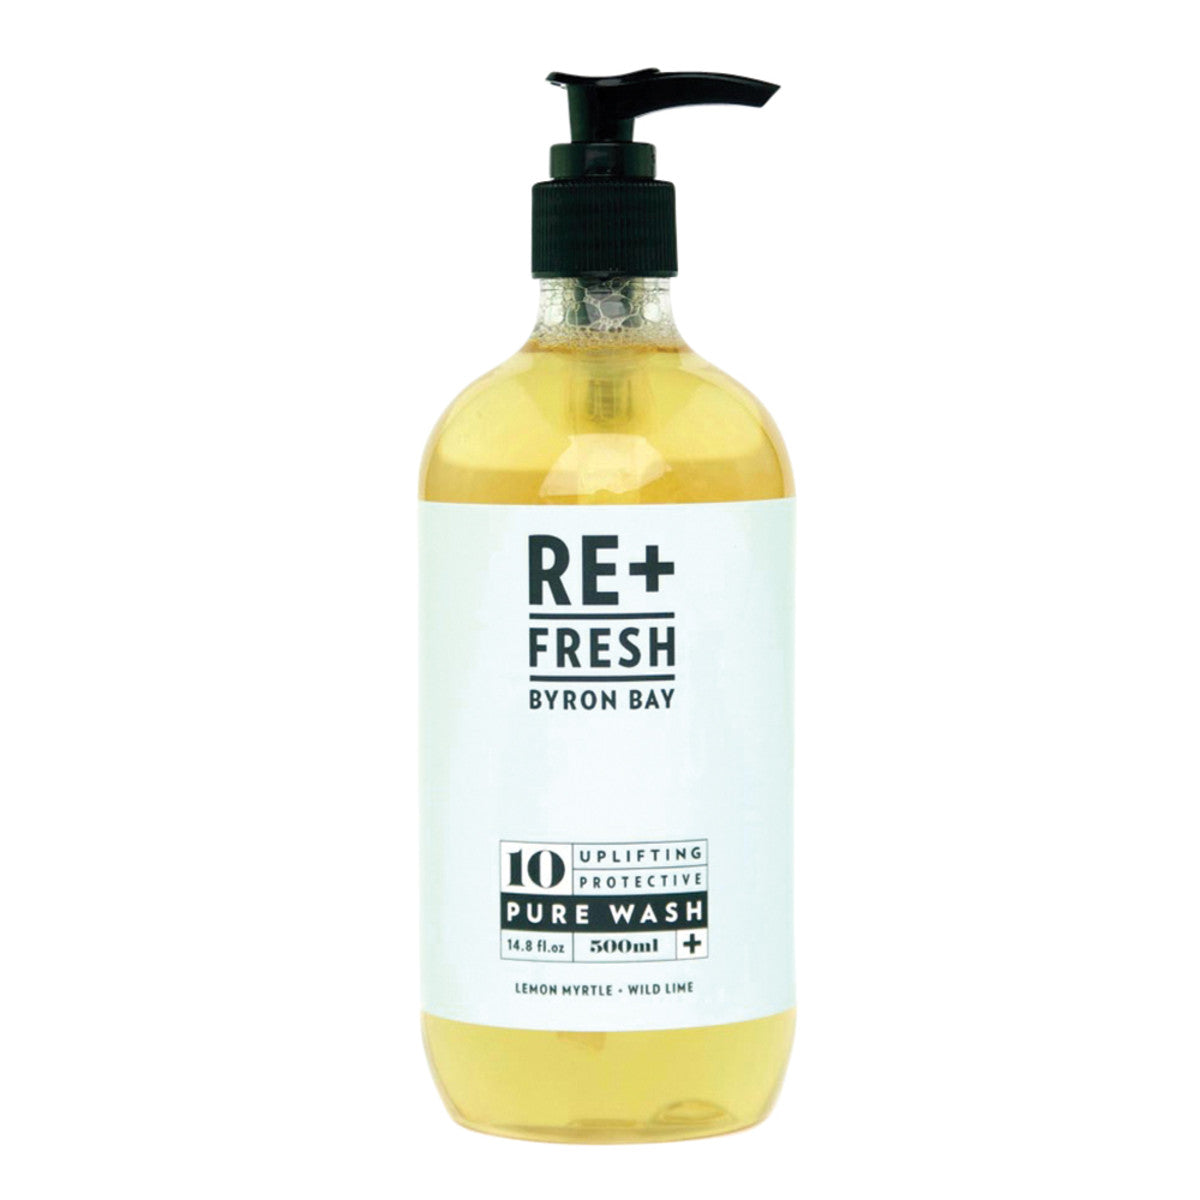 ReFresh Byron Bay Pure Wash Lemon Myrtle and Wild Lime 500ml